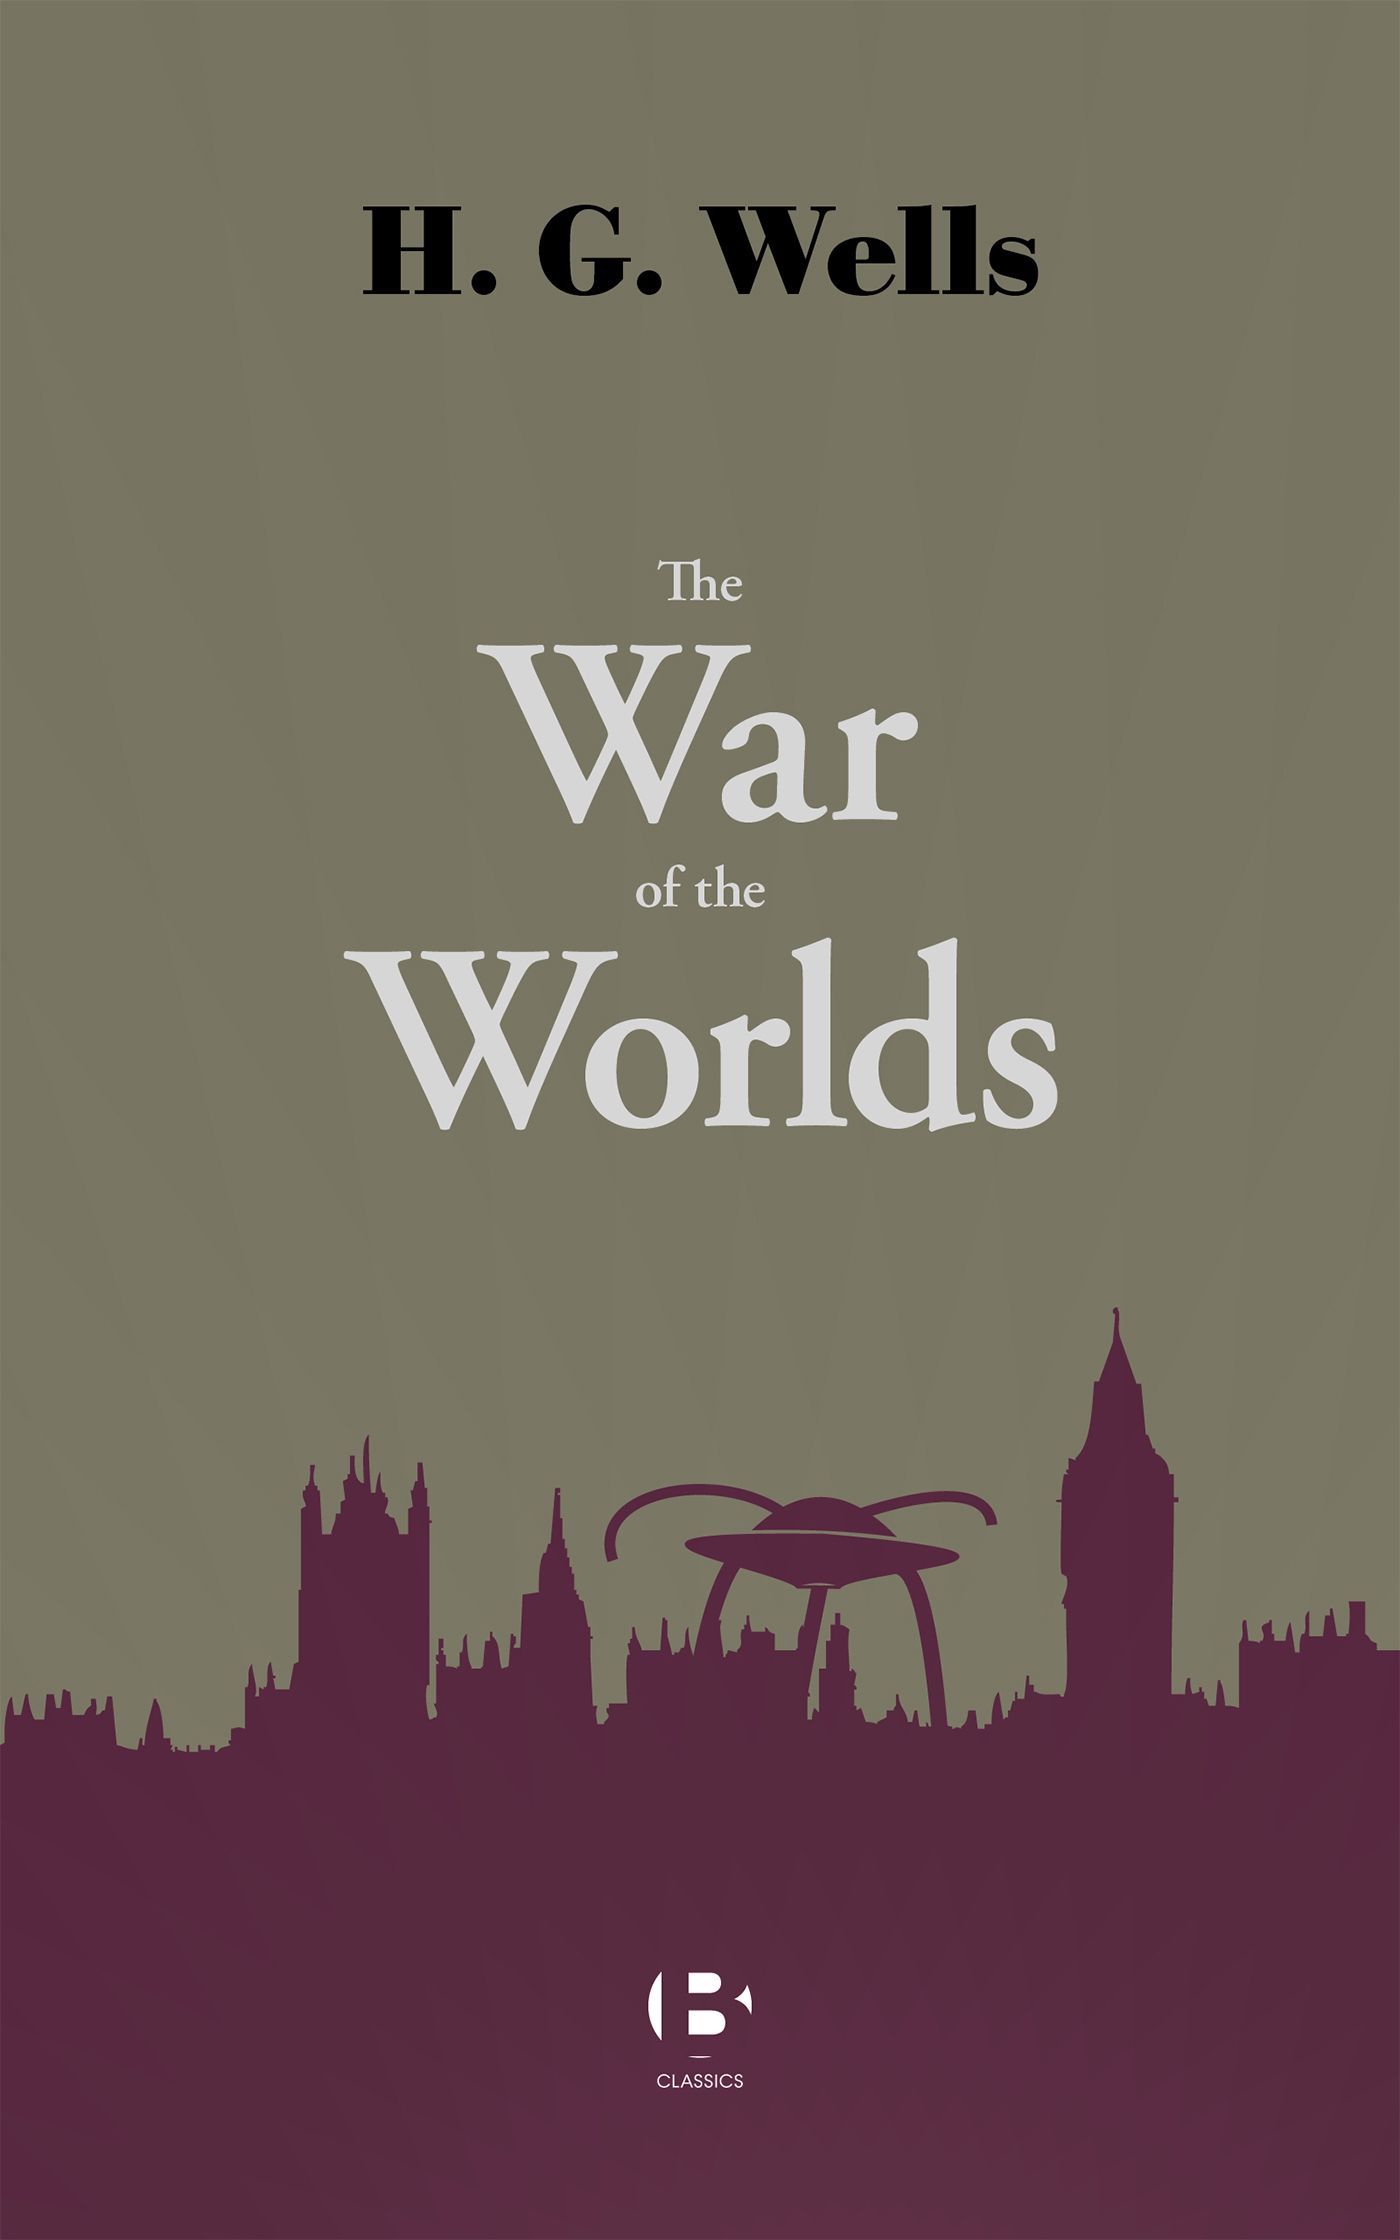 The War of the Worlds, eBook by H. G. Wells